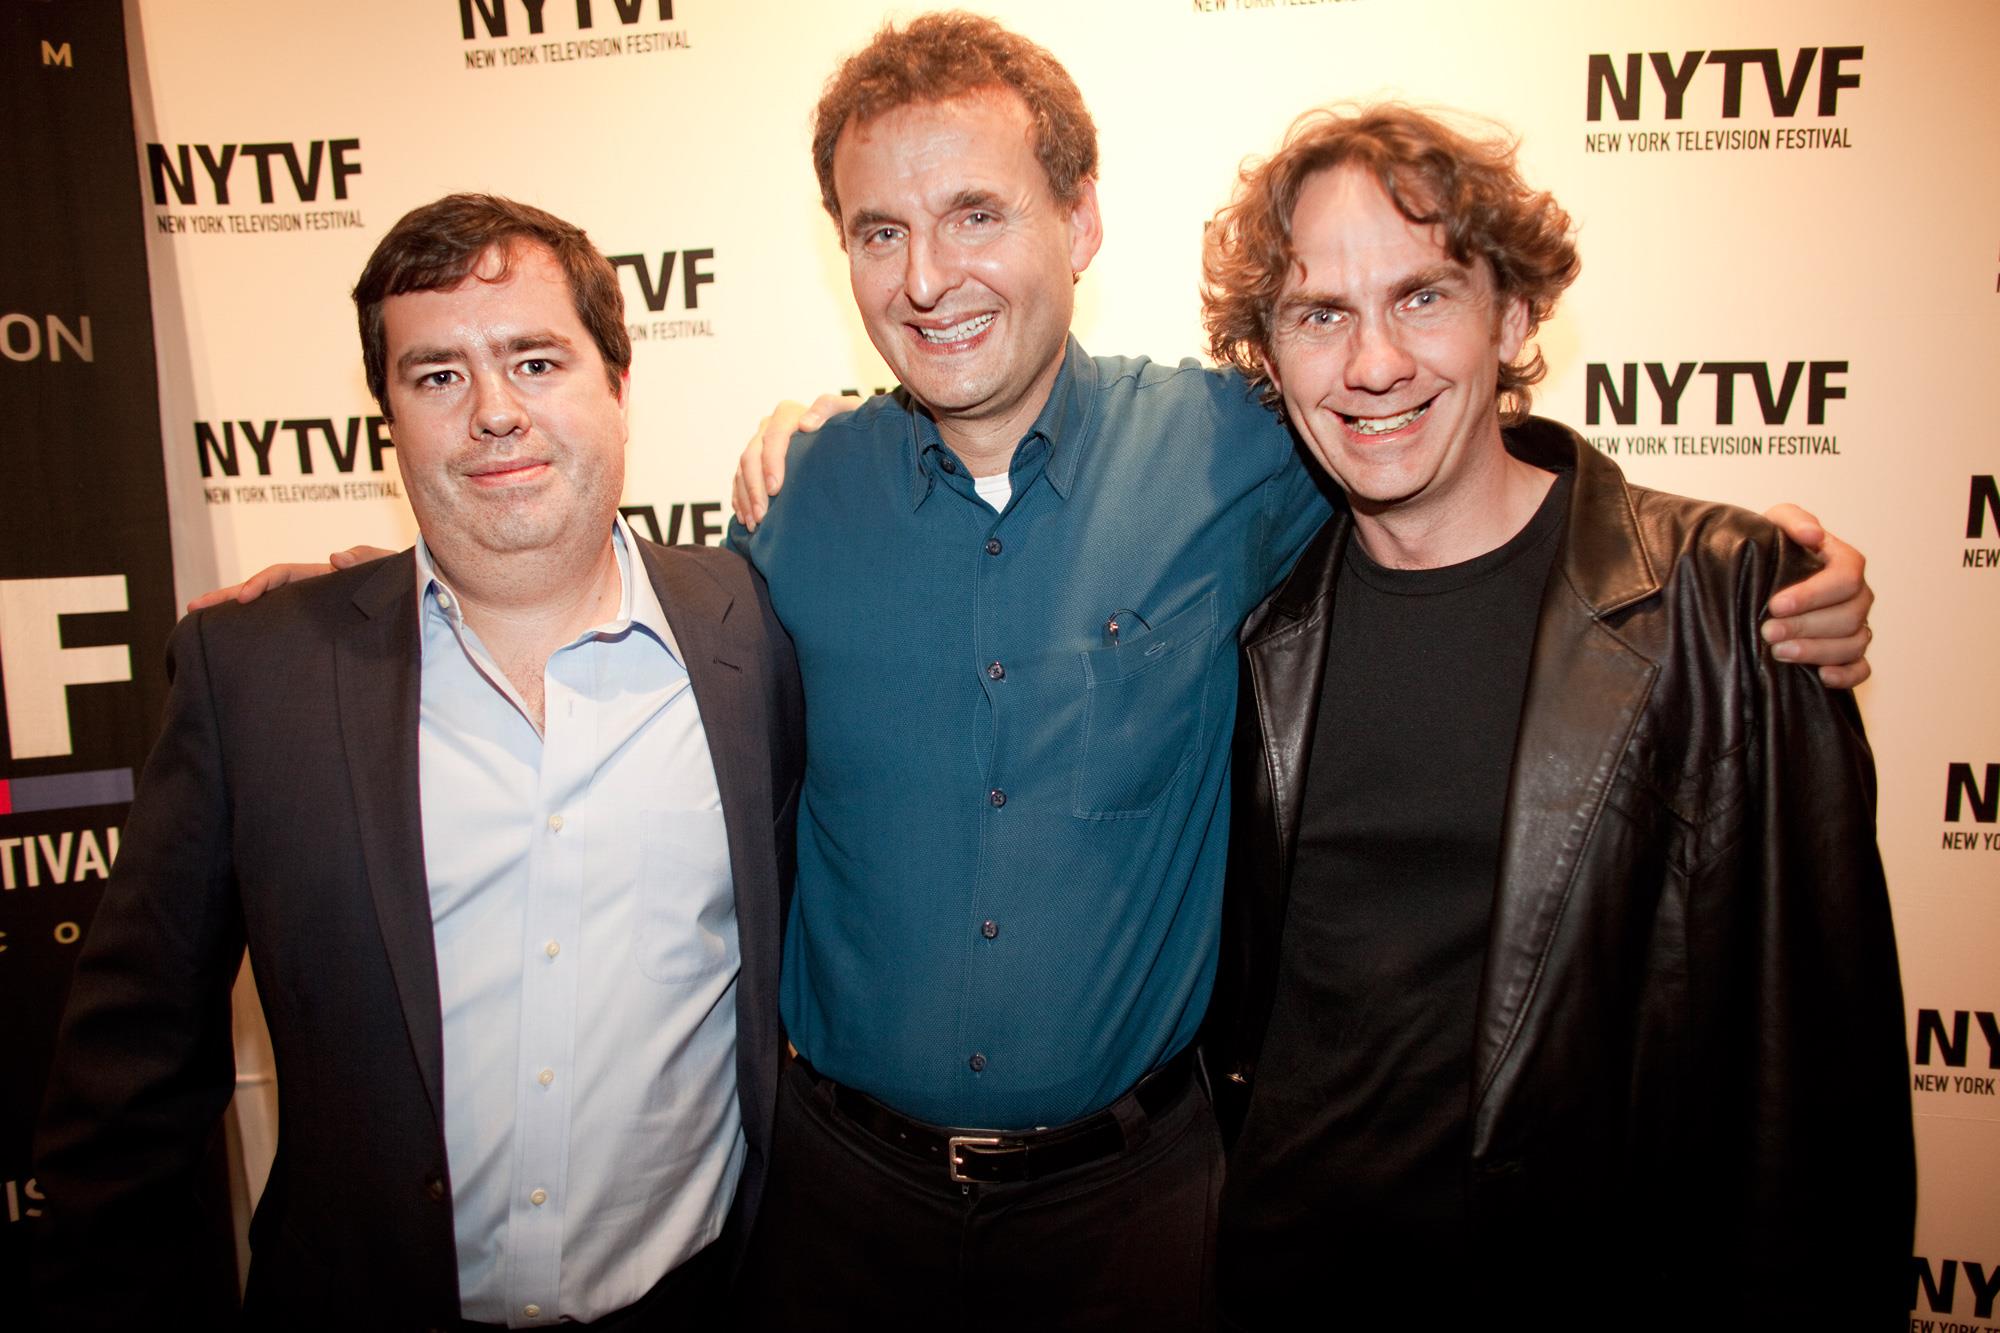 At NYTVF with festival director Terence Gray and mentor Phil Rosenthal.